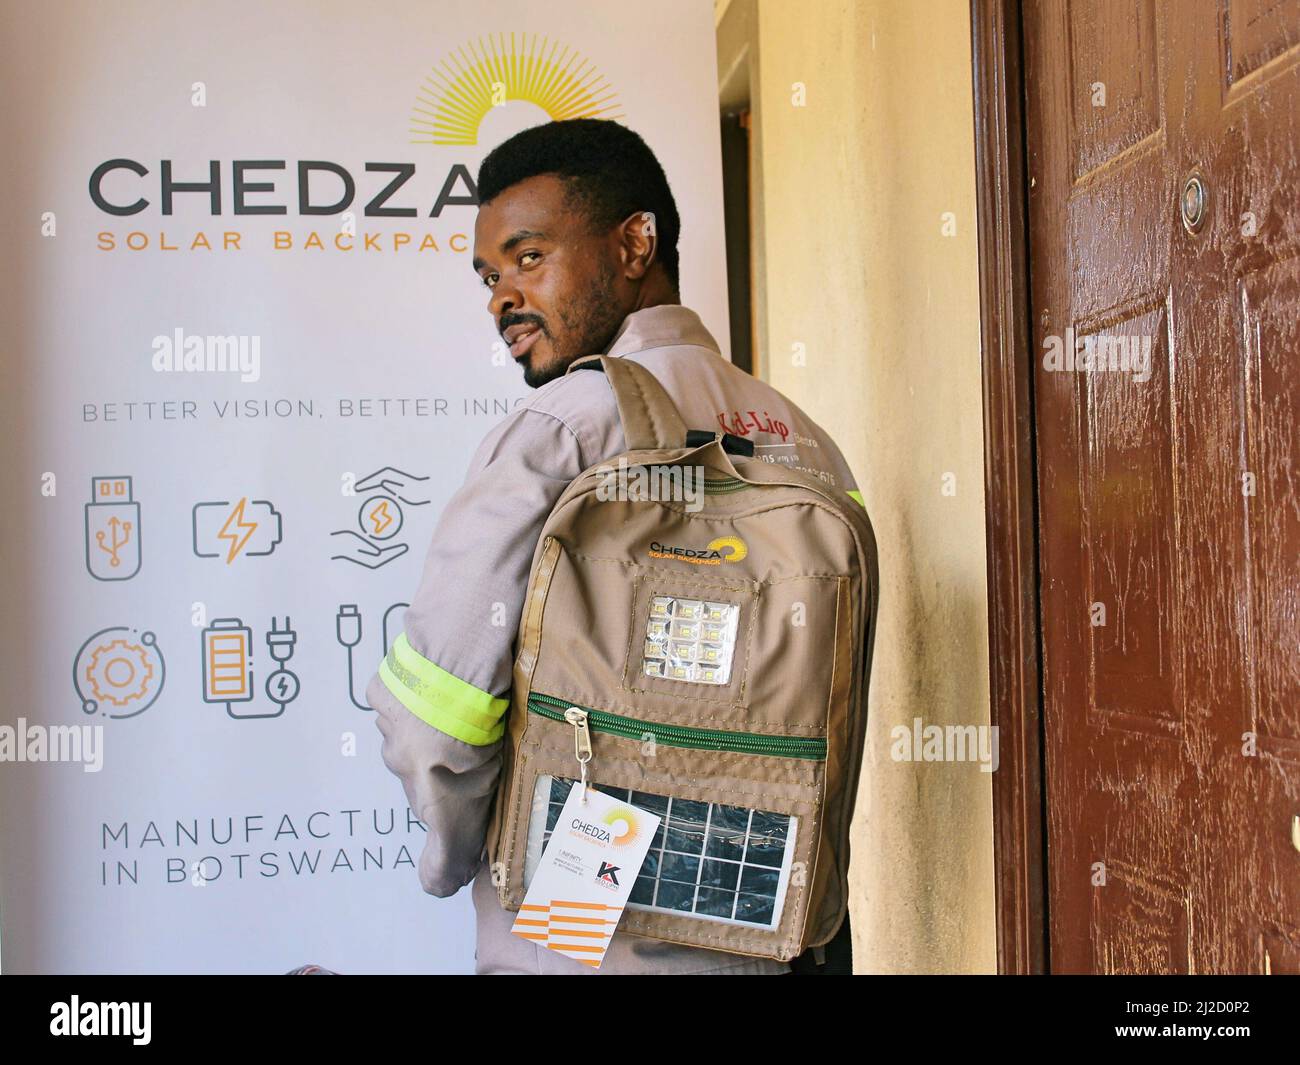 Gaborone, Botswana. 21st Mar, 2022. Kedumetse Liphi, the 31-year-old innovative creator of Chedza Solar Backpacks, shows a solar backpack in Gaborone, Botswana, on March 21, 2022. In the first week of April, disadvantaged children in Botswana villages such as Tshono, Mokhomba, Lefoko and Sevrelela will receive Chedza Solar Backpacks that will enable them to study at night. Credit: Sharon Tshipa/Xinhua/Alamy Live News Stock Photo